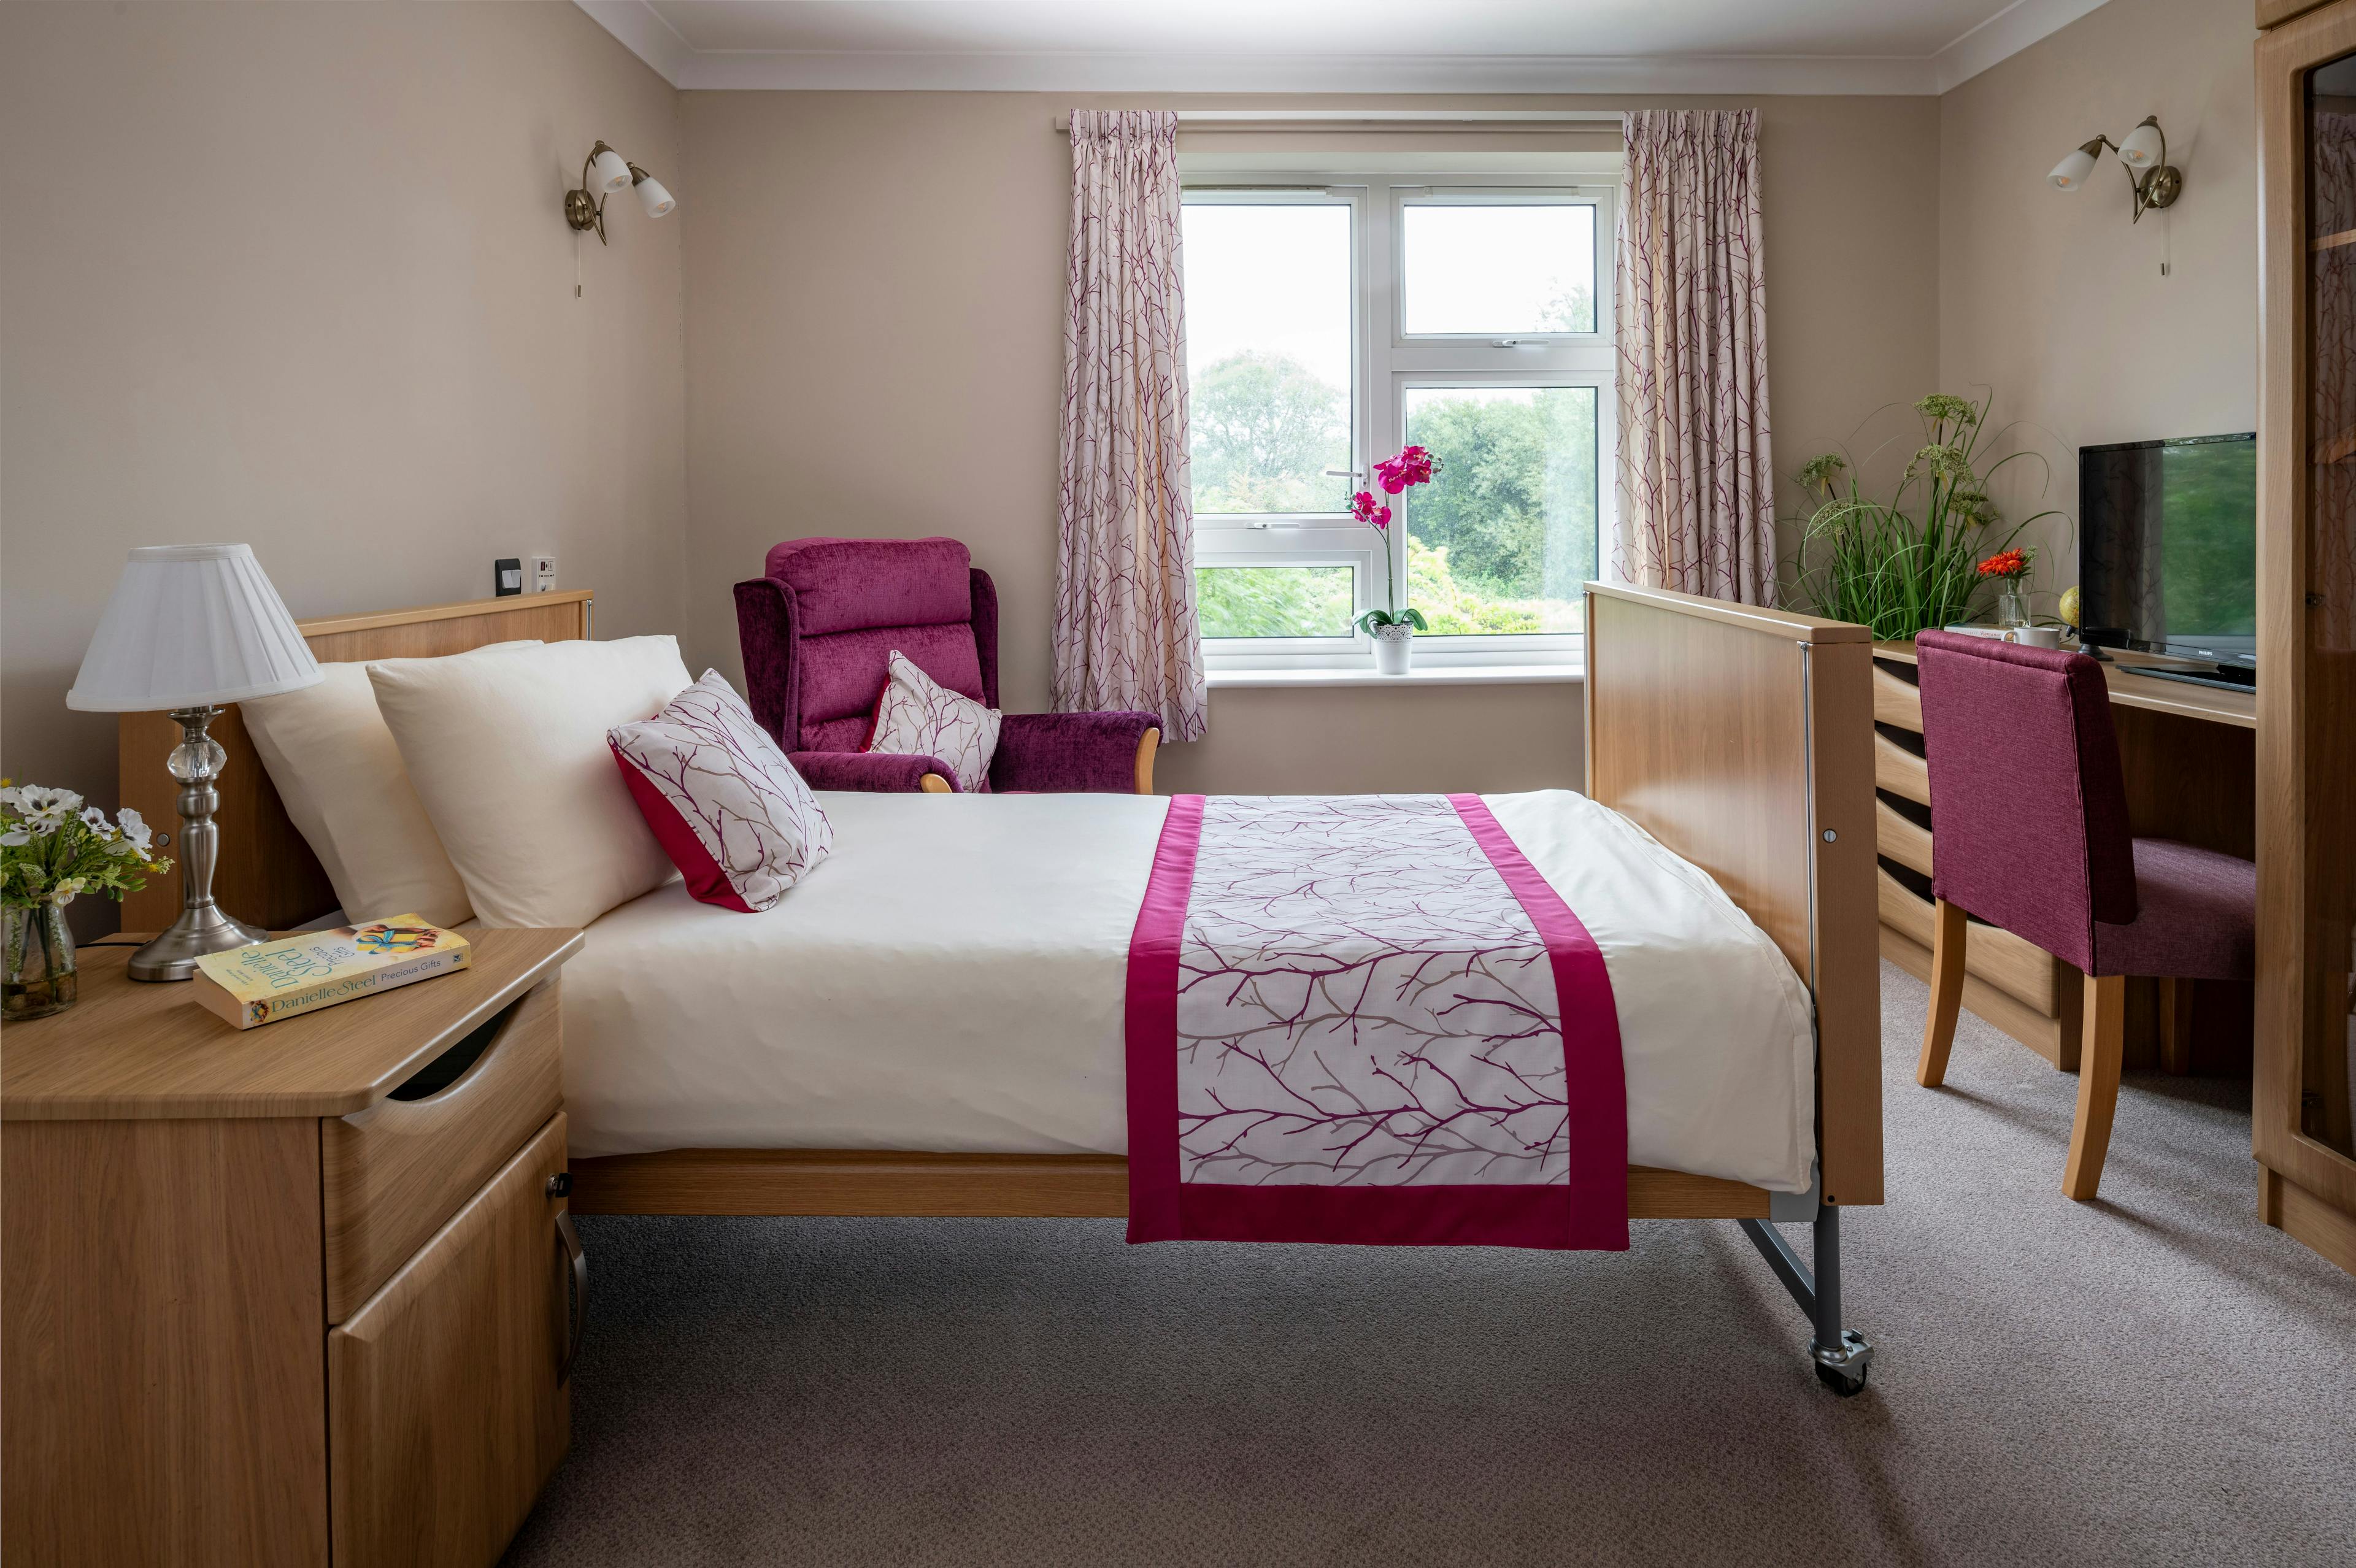 Bedroom at The Lakes Care Home in Cirencester, Cotsworld